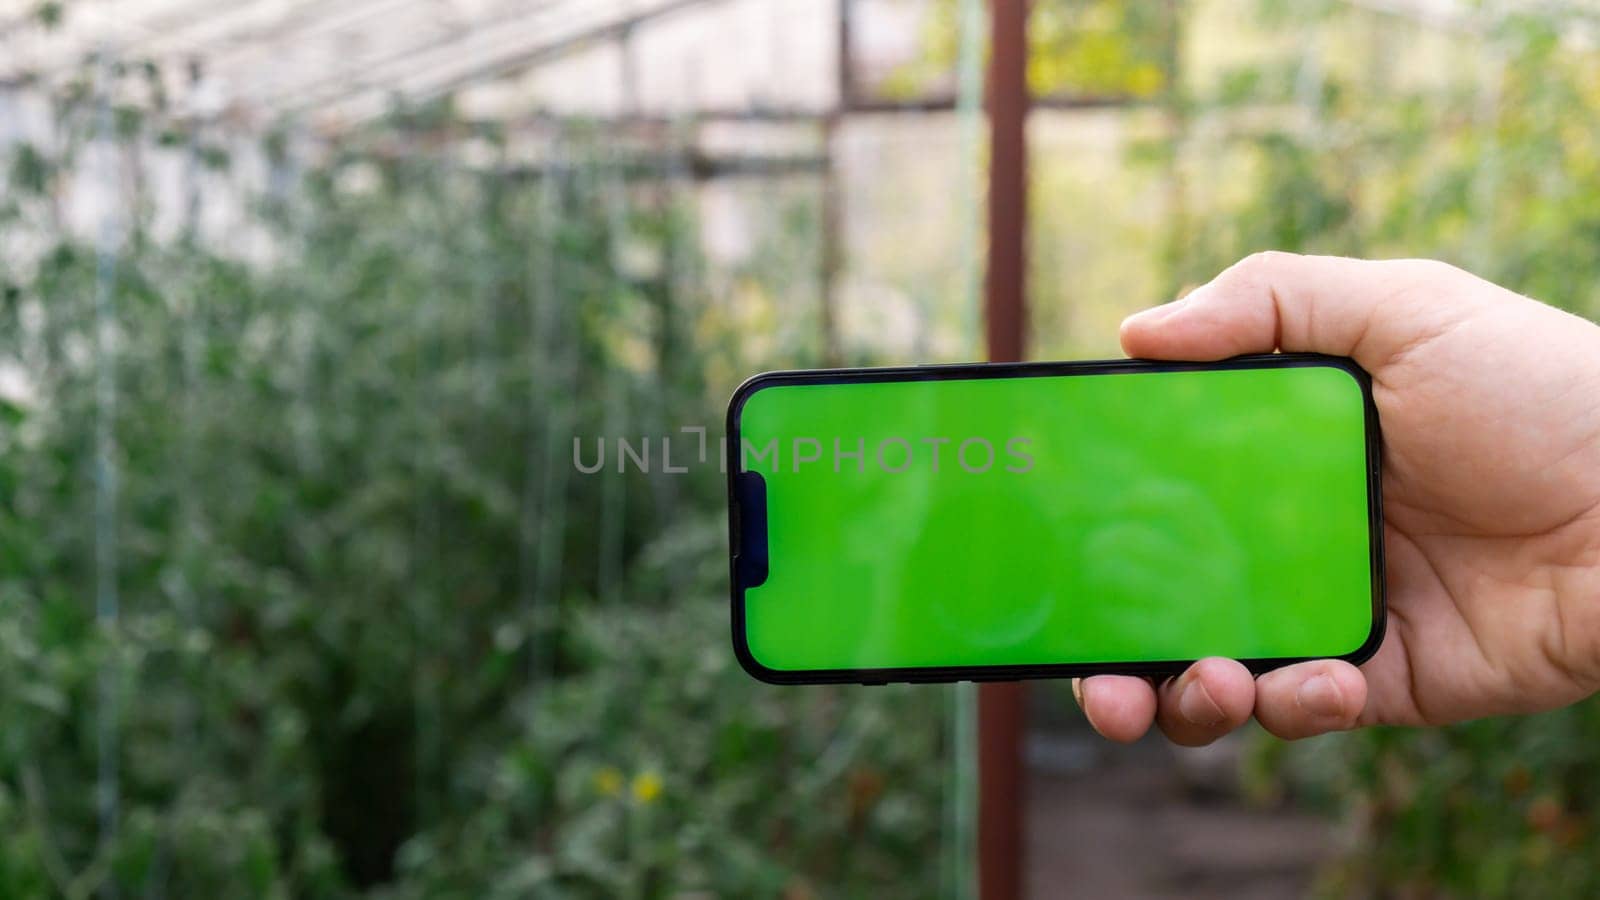 Artificial intelligent management system in farm. Smart gardening at home. Empty green screen chroma key mobile phone sample. Futuristic ai technologies in farming agriculture.